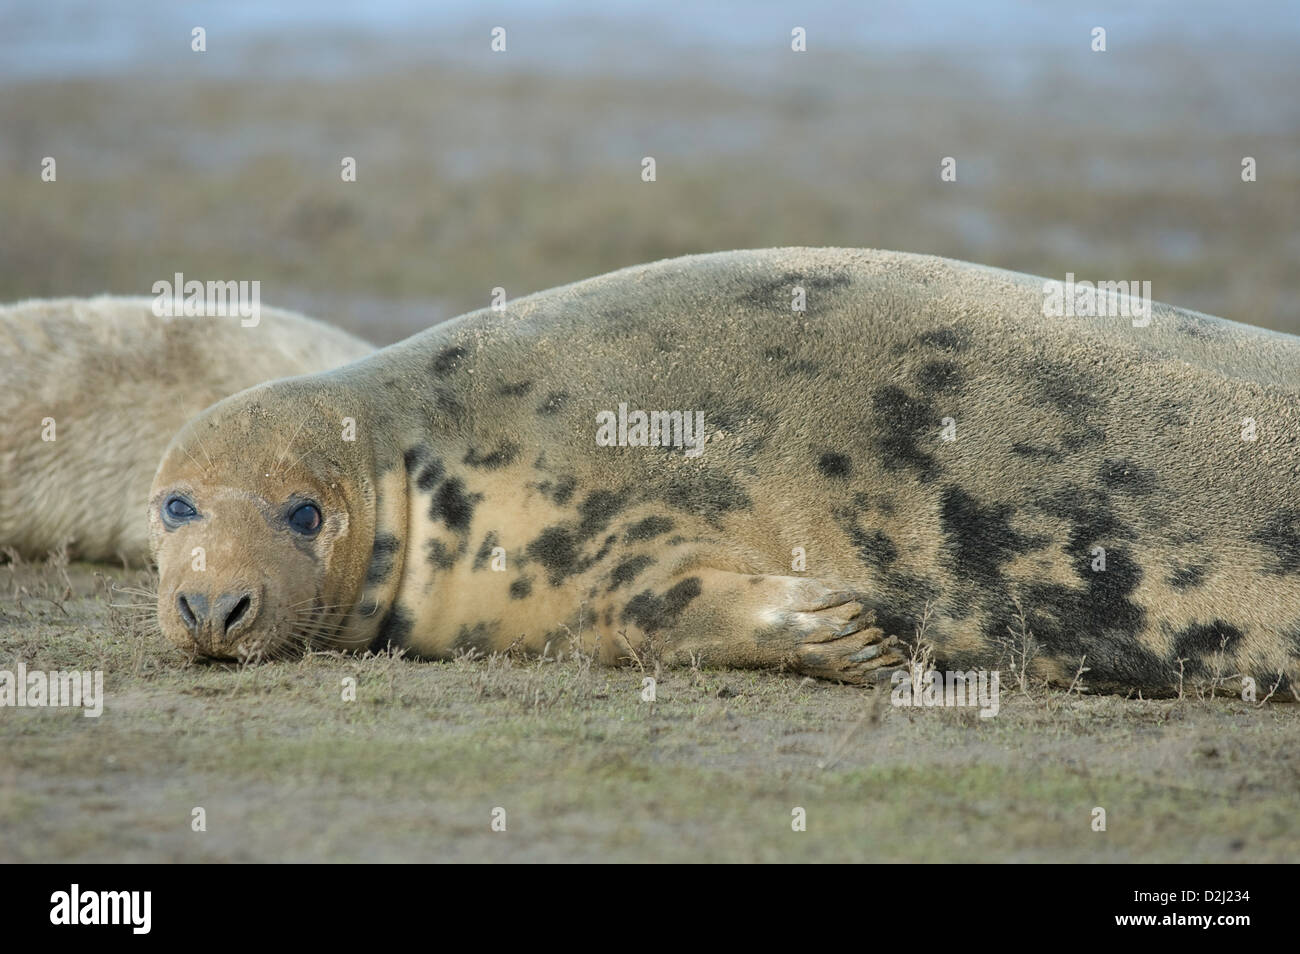 Seal at Donna nook north lincolnshire Stock Photo